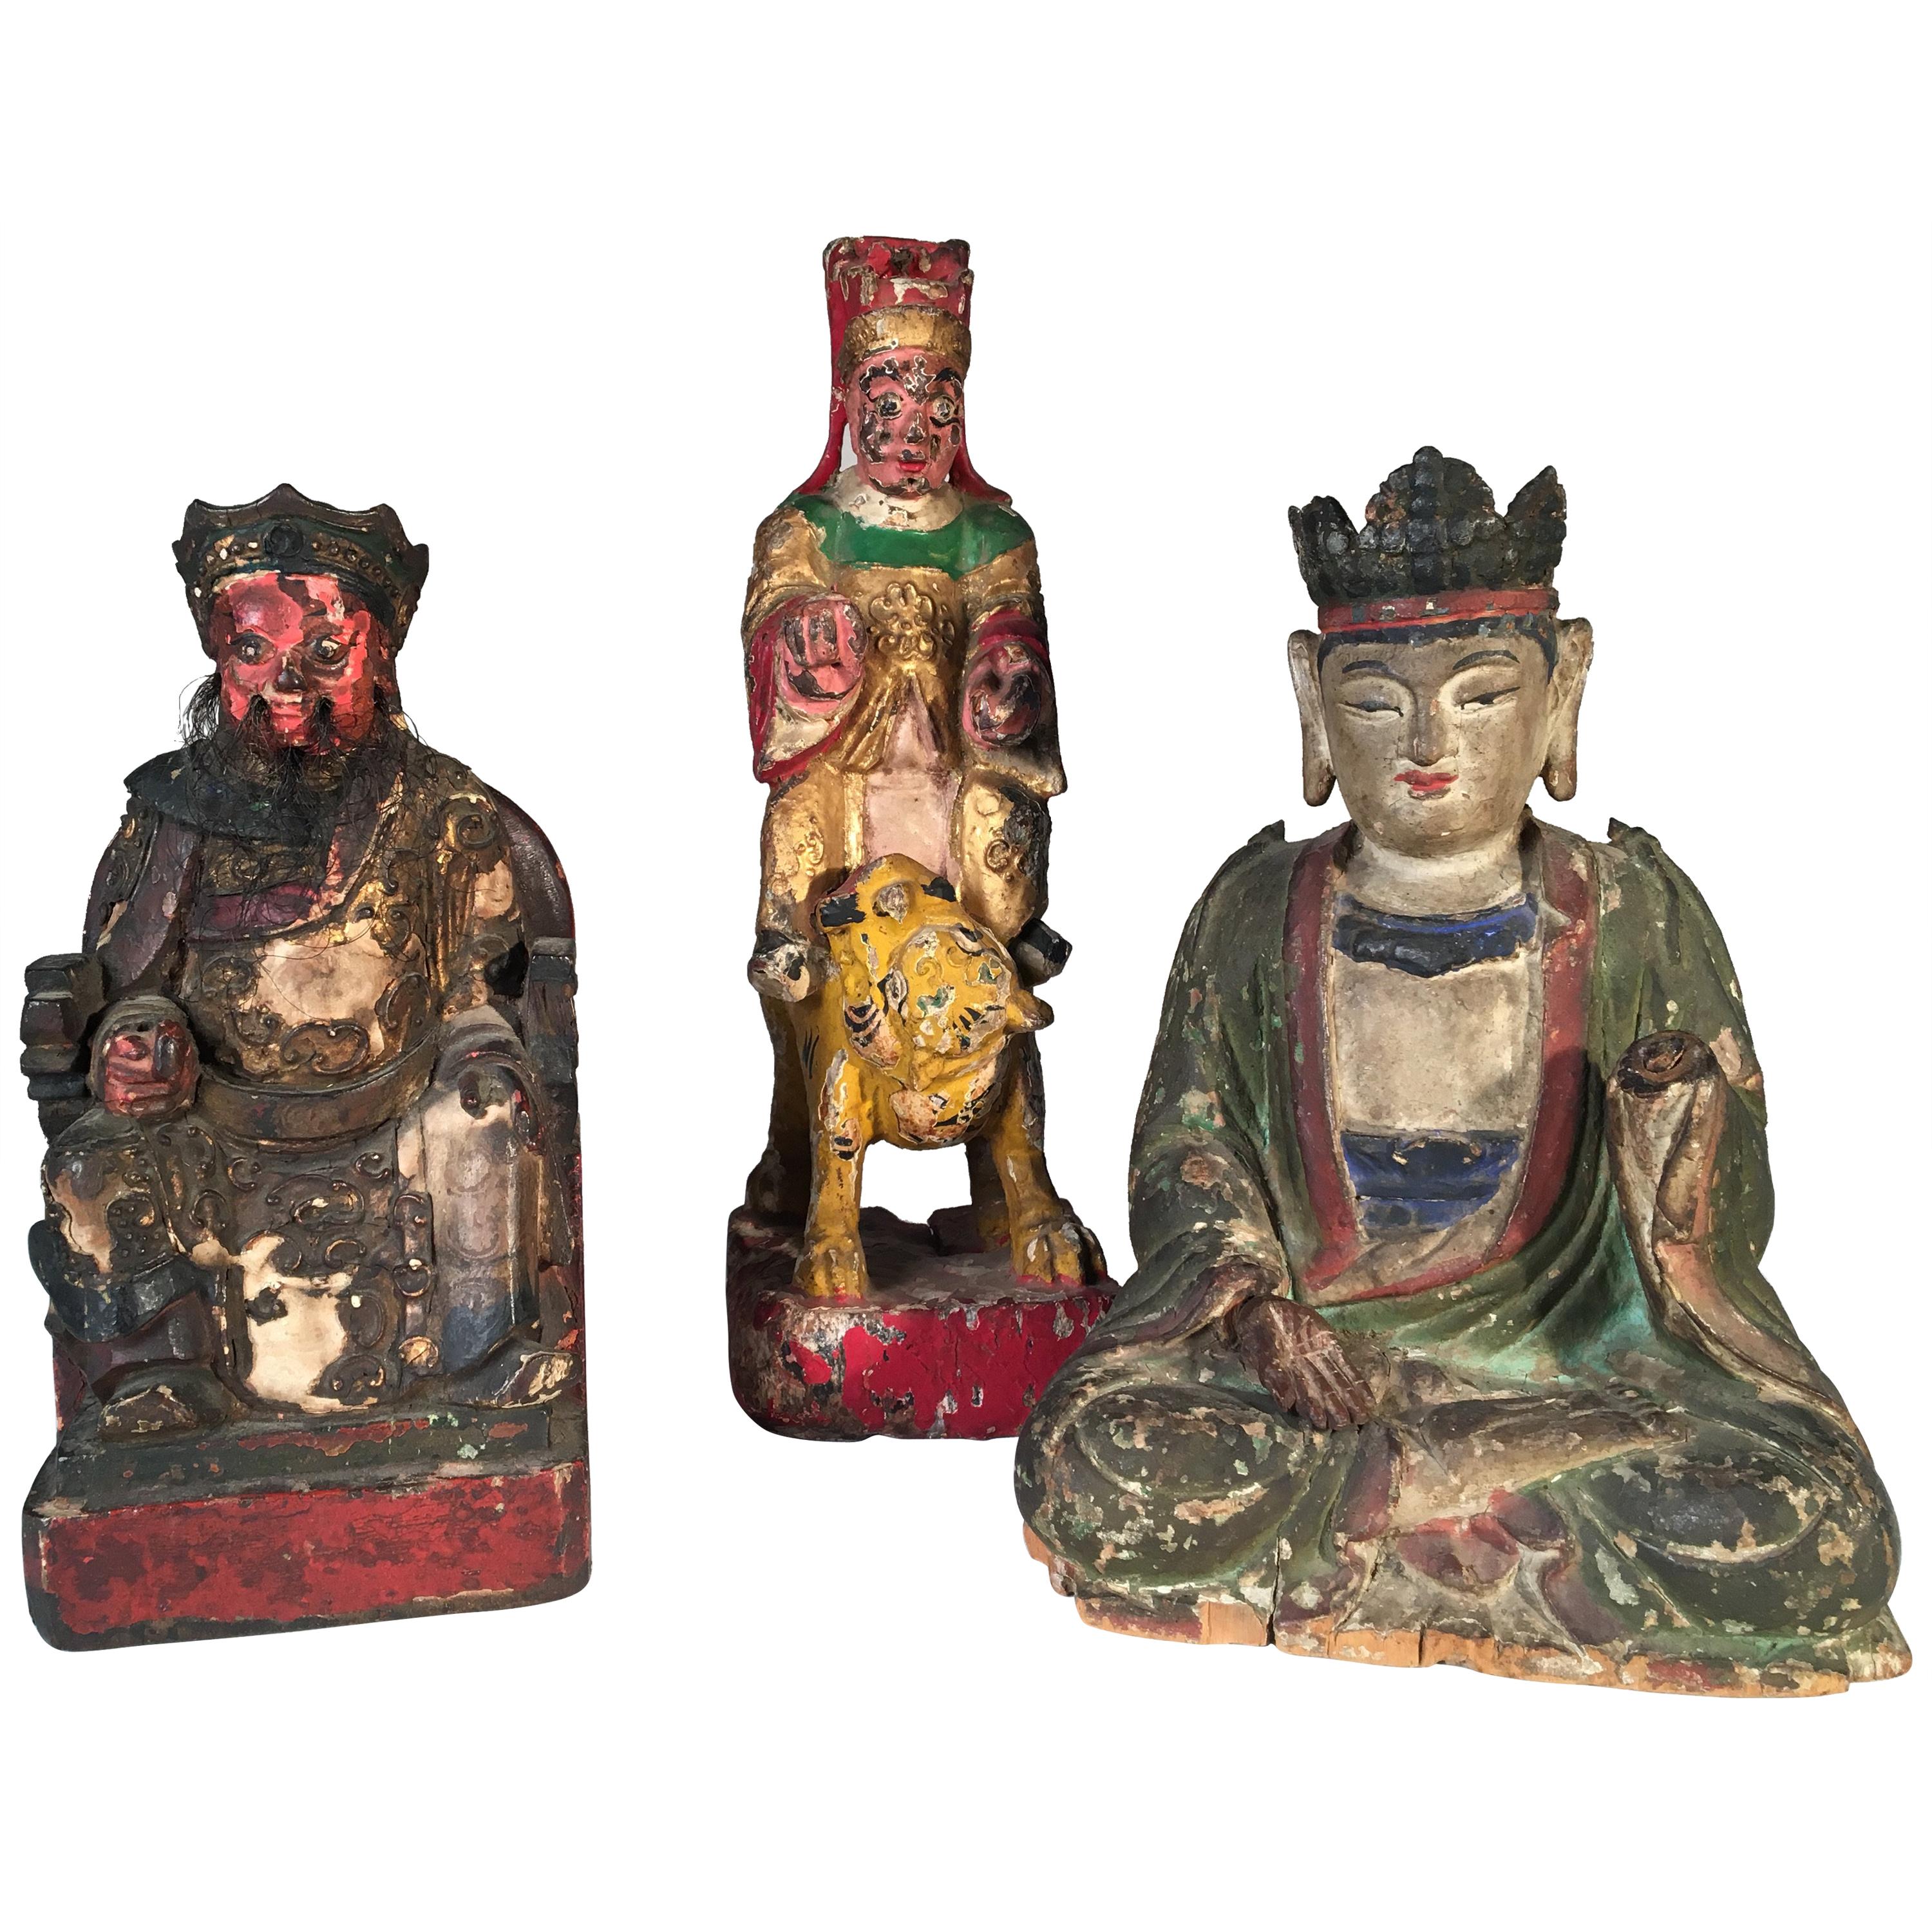 Collection of 3 Carved Wooded Asian Deities